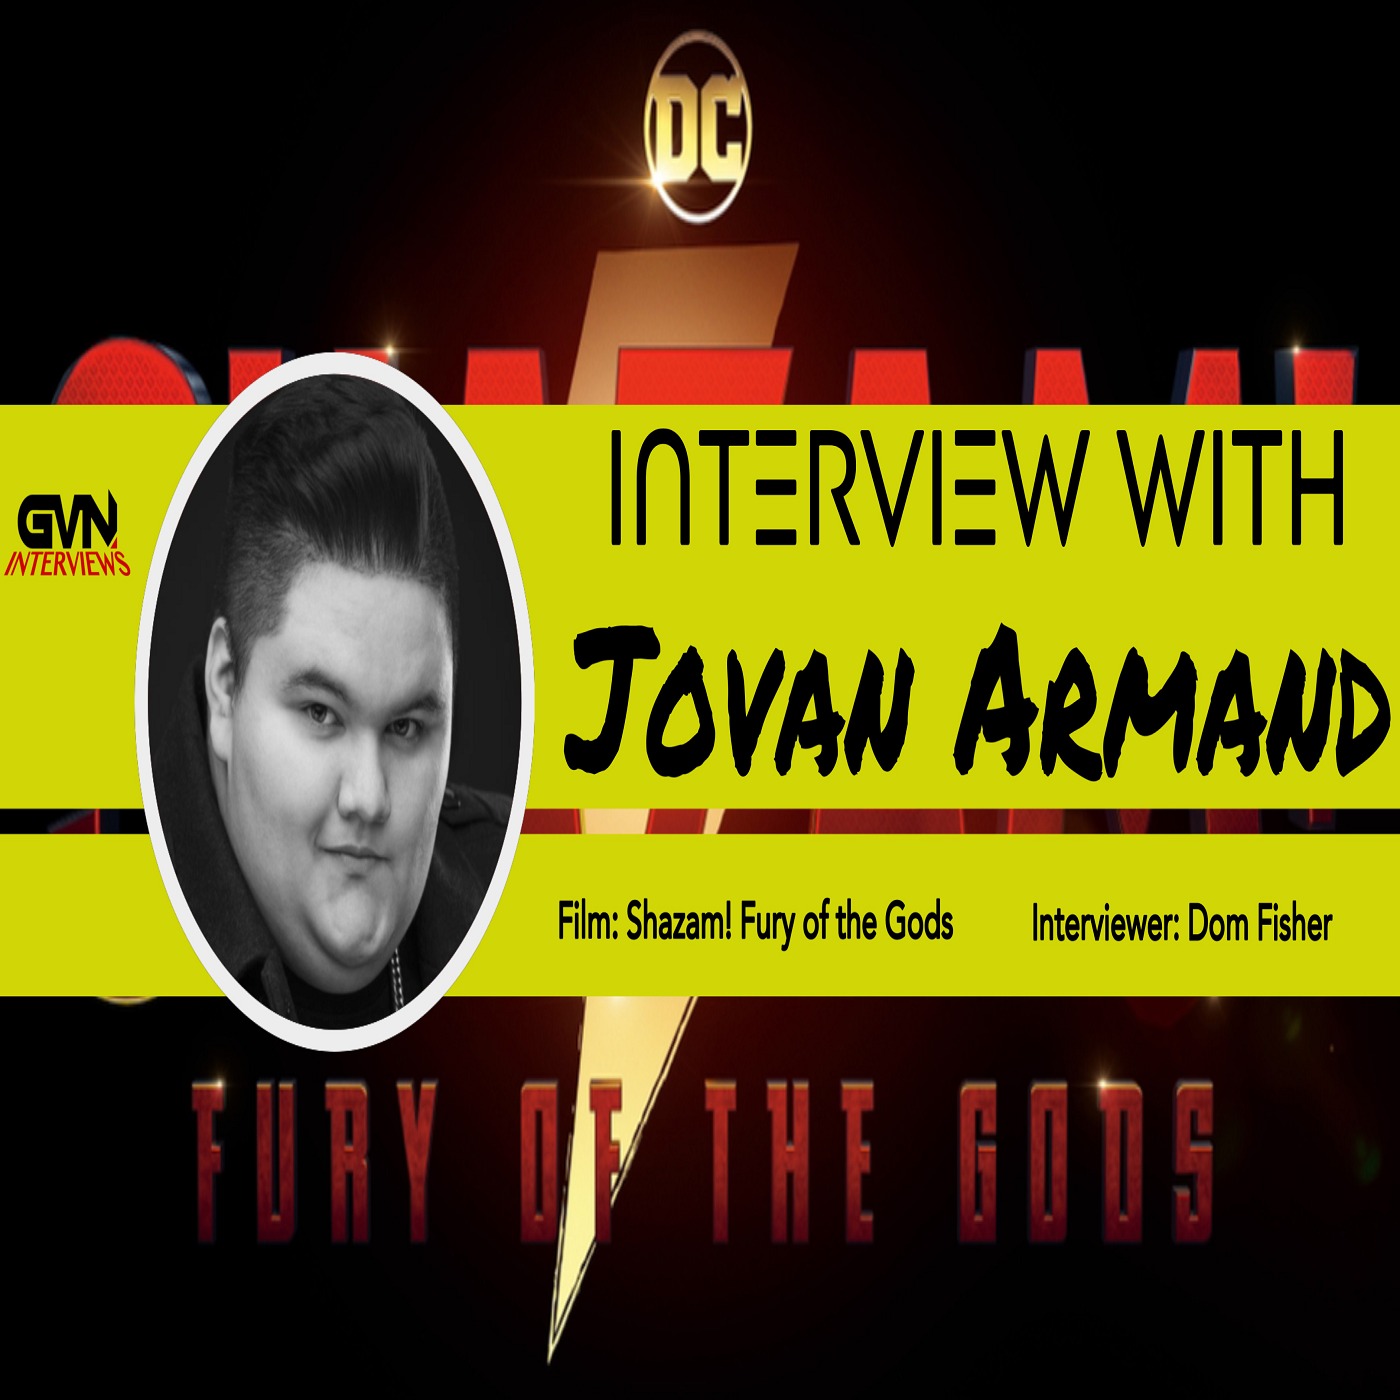 Interview With Shazam Fury Of The Gods Actor Jovan Armand